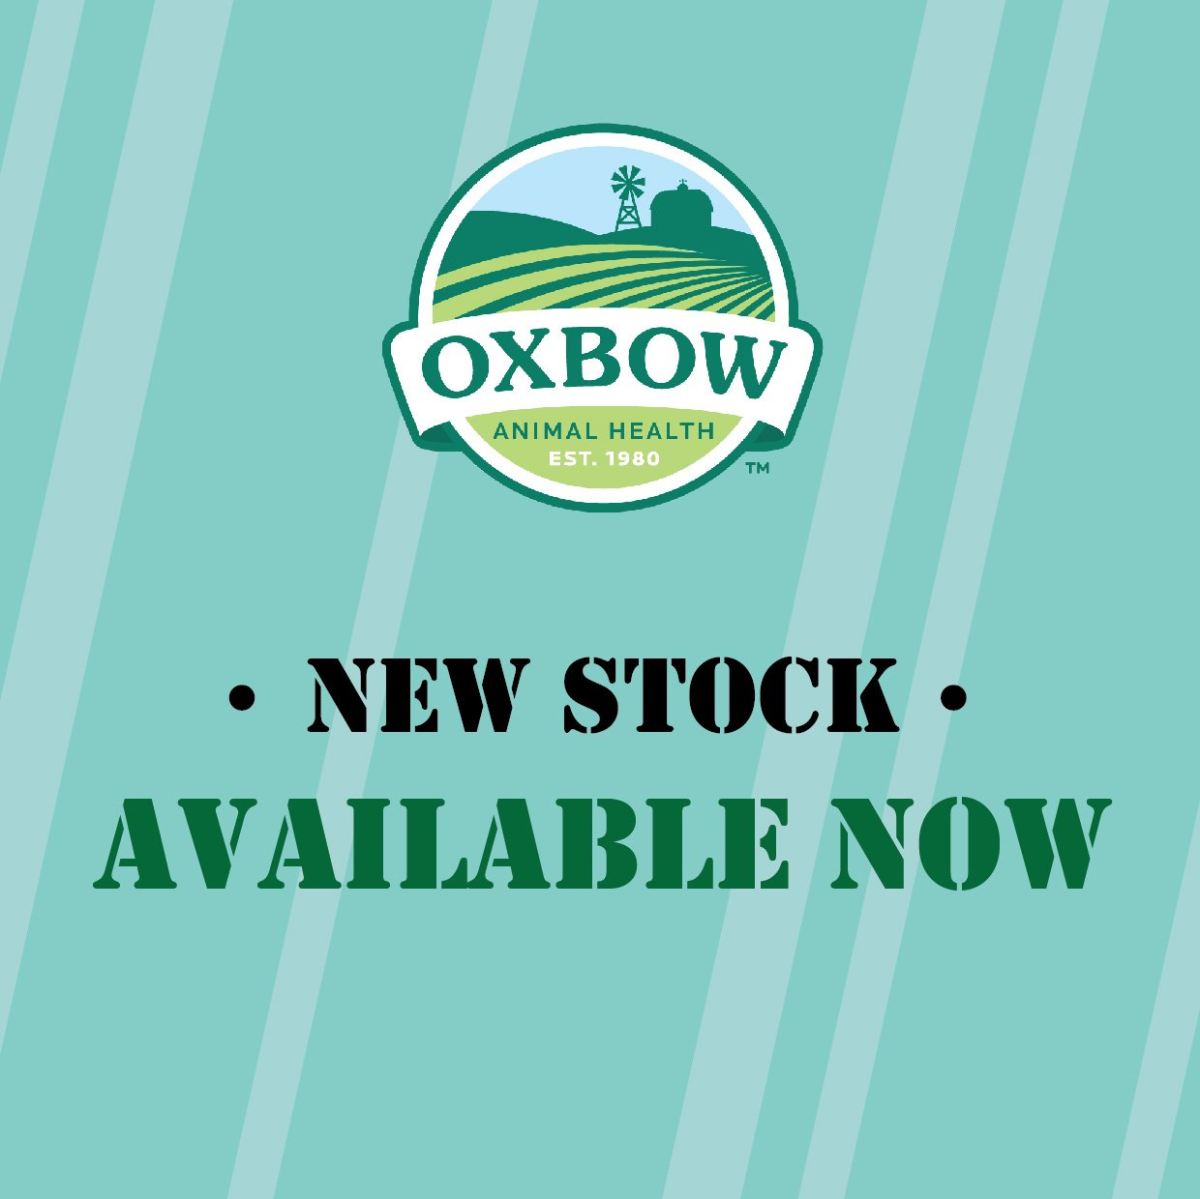 Oxbow is back!